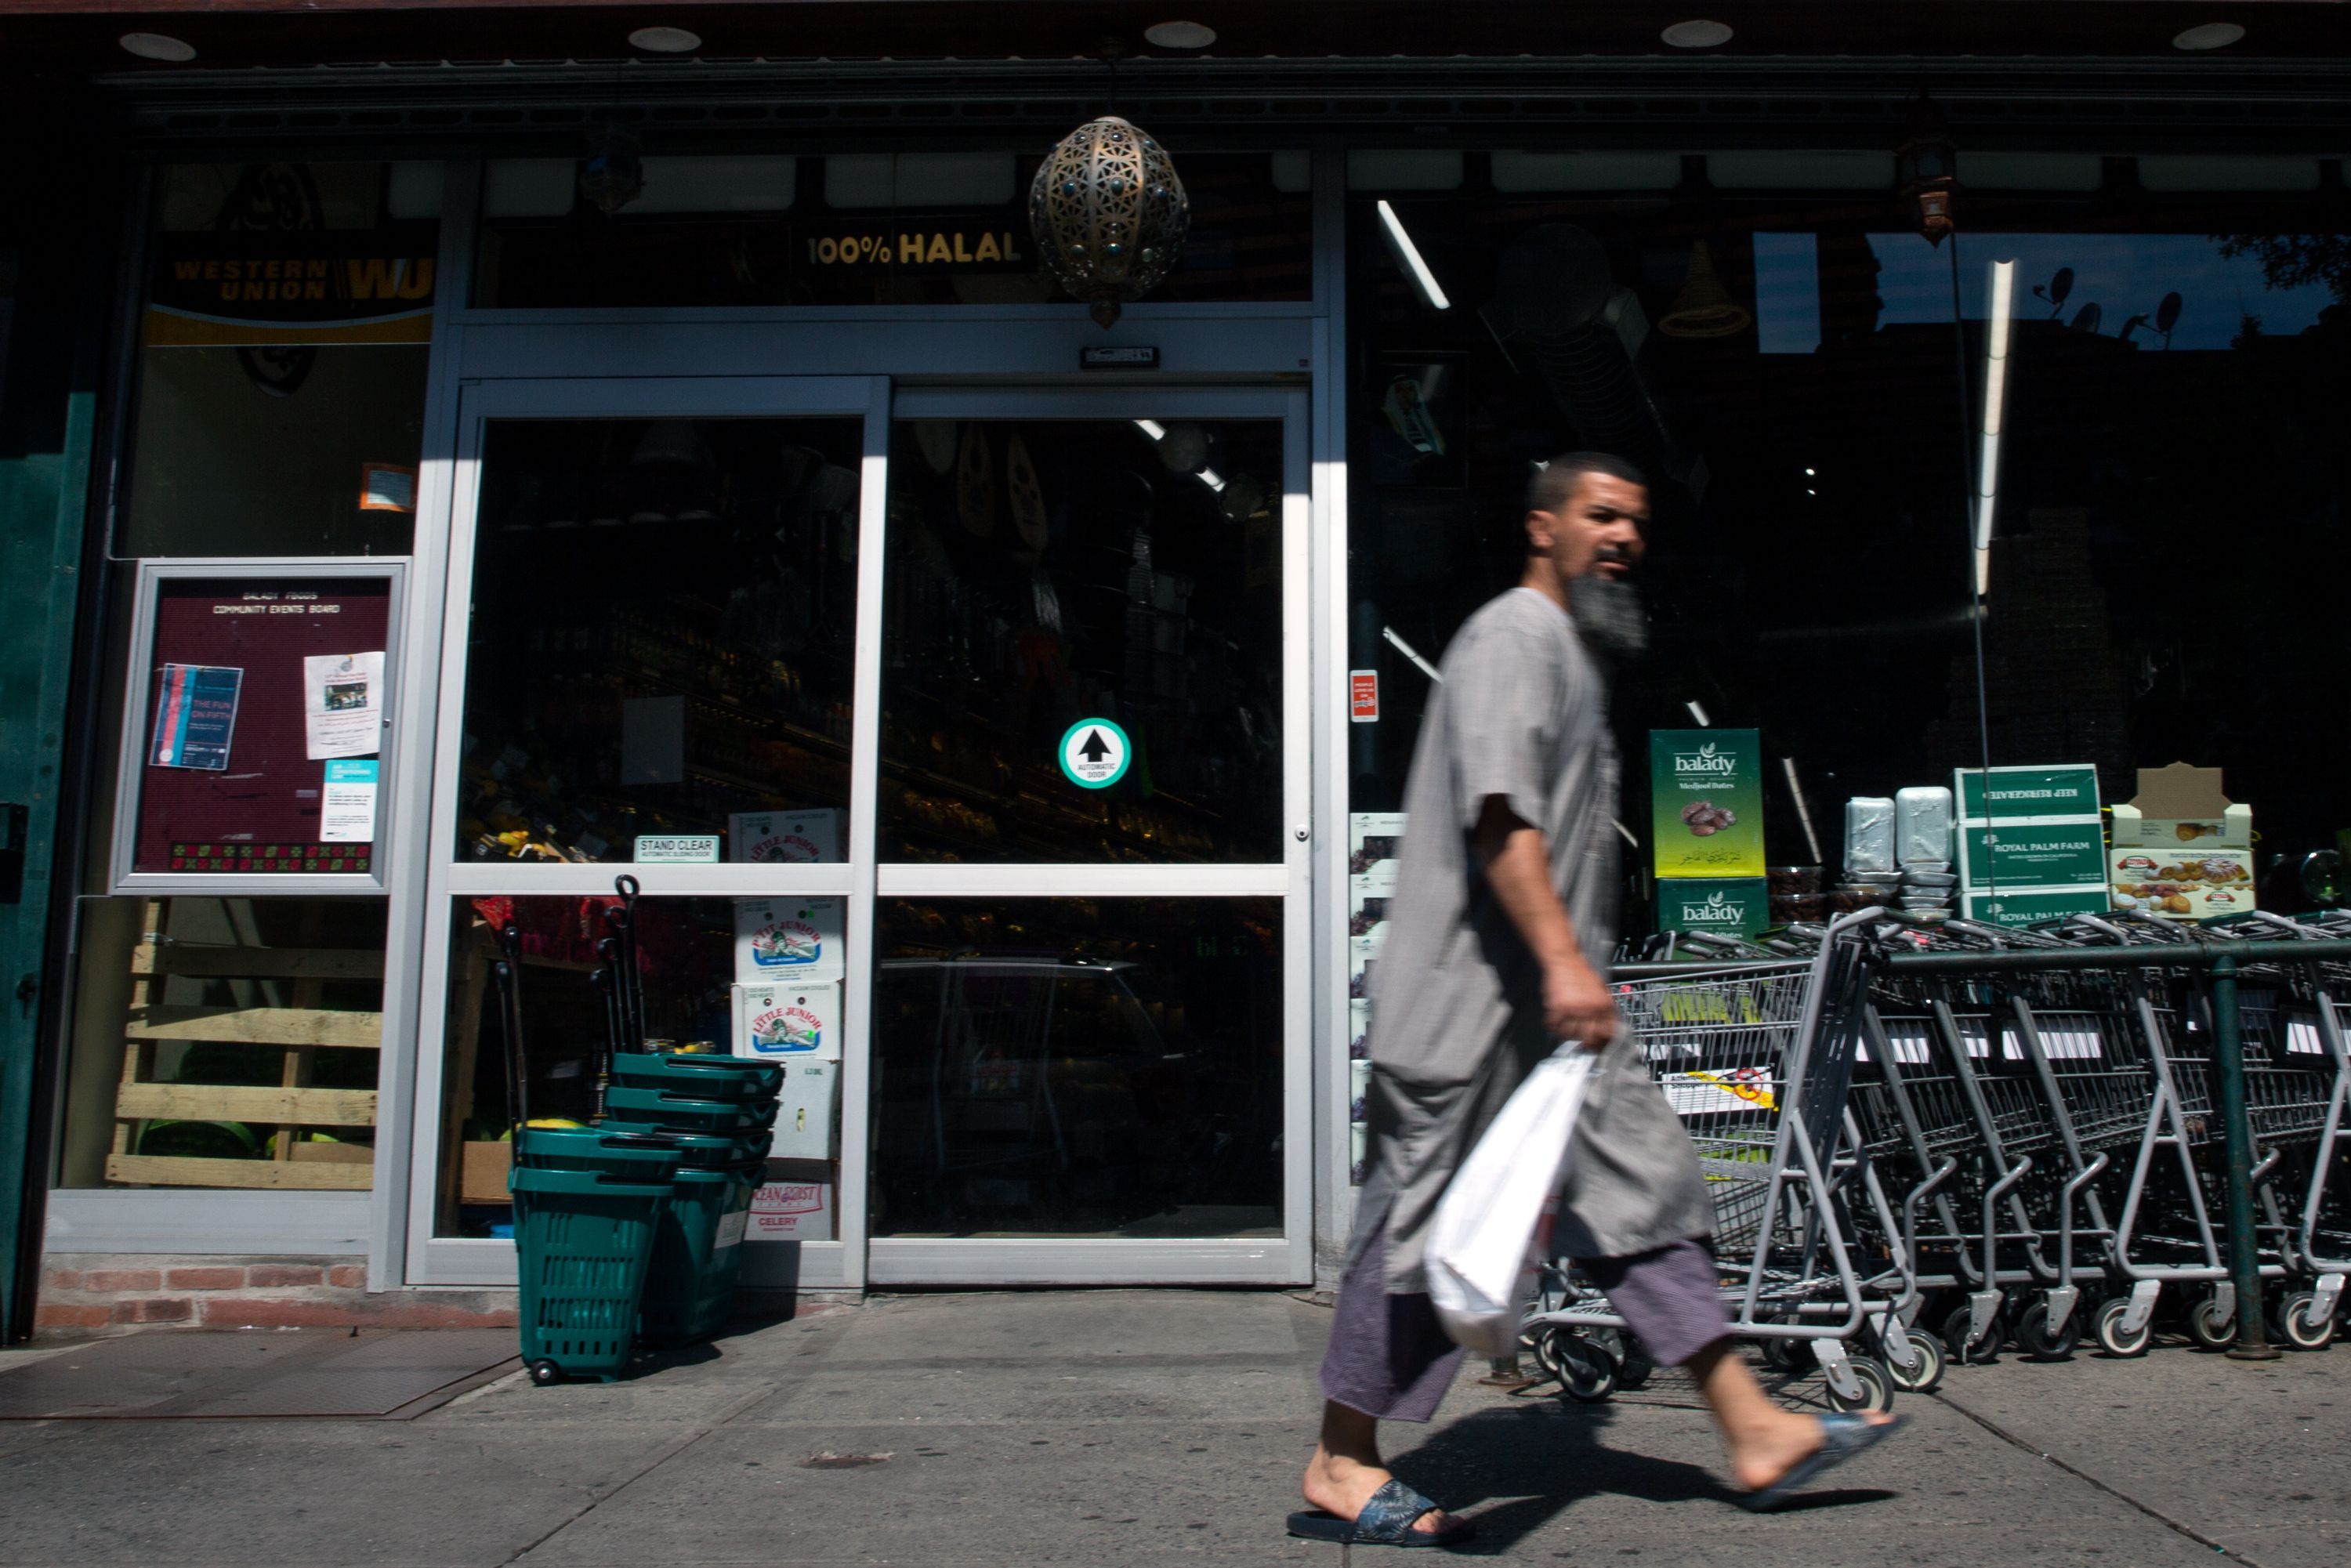 A man walks past a halal grocer on Fifth Avenue and 72nd Street in Bay Ridge, Brooklyn, on July 14, 2019.